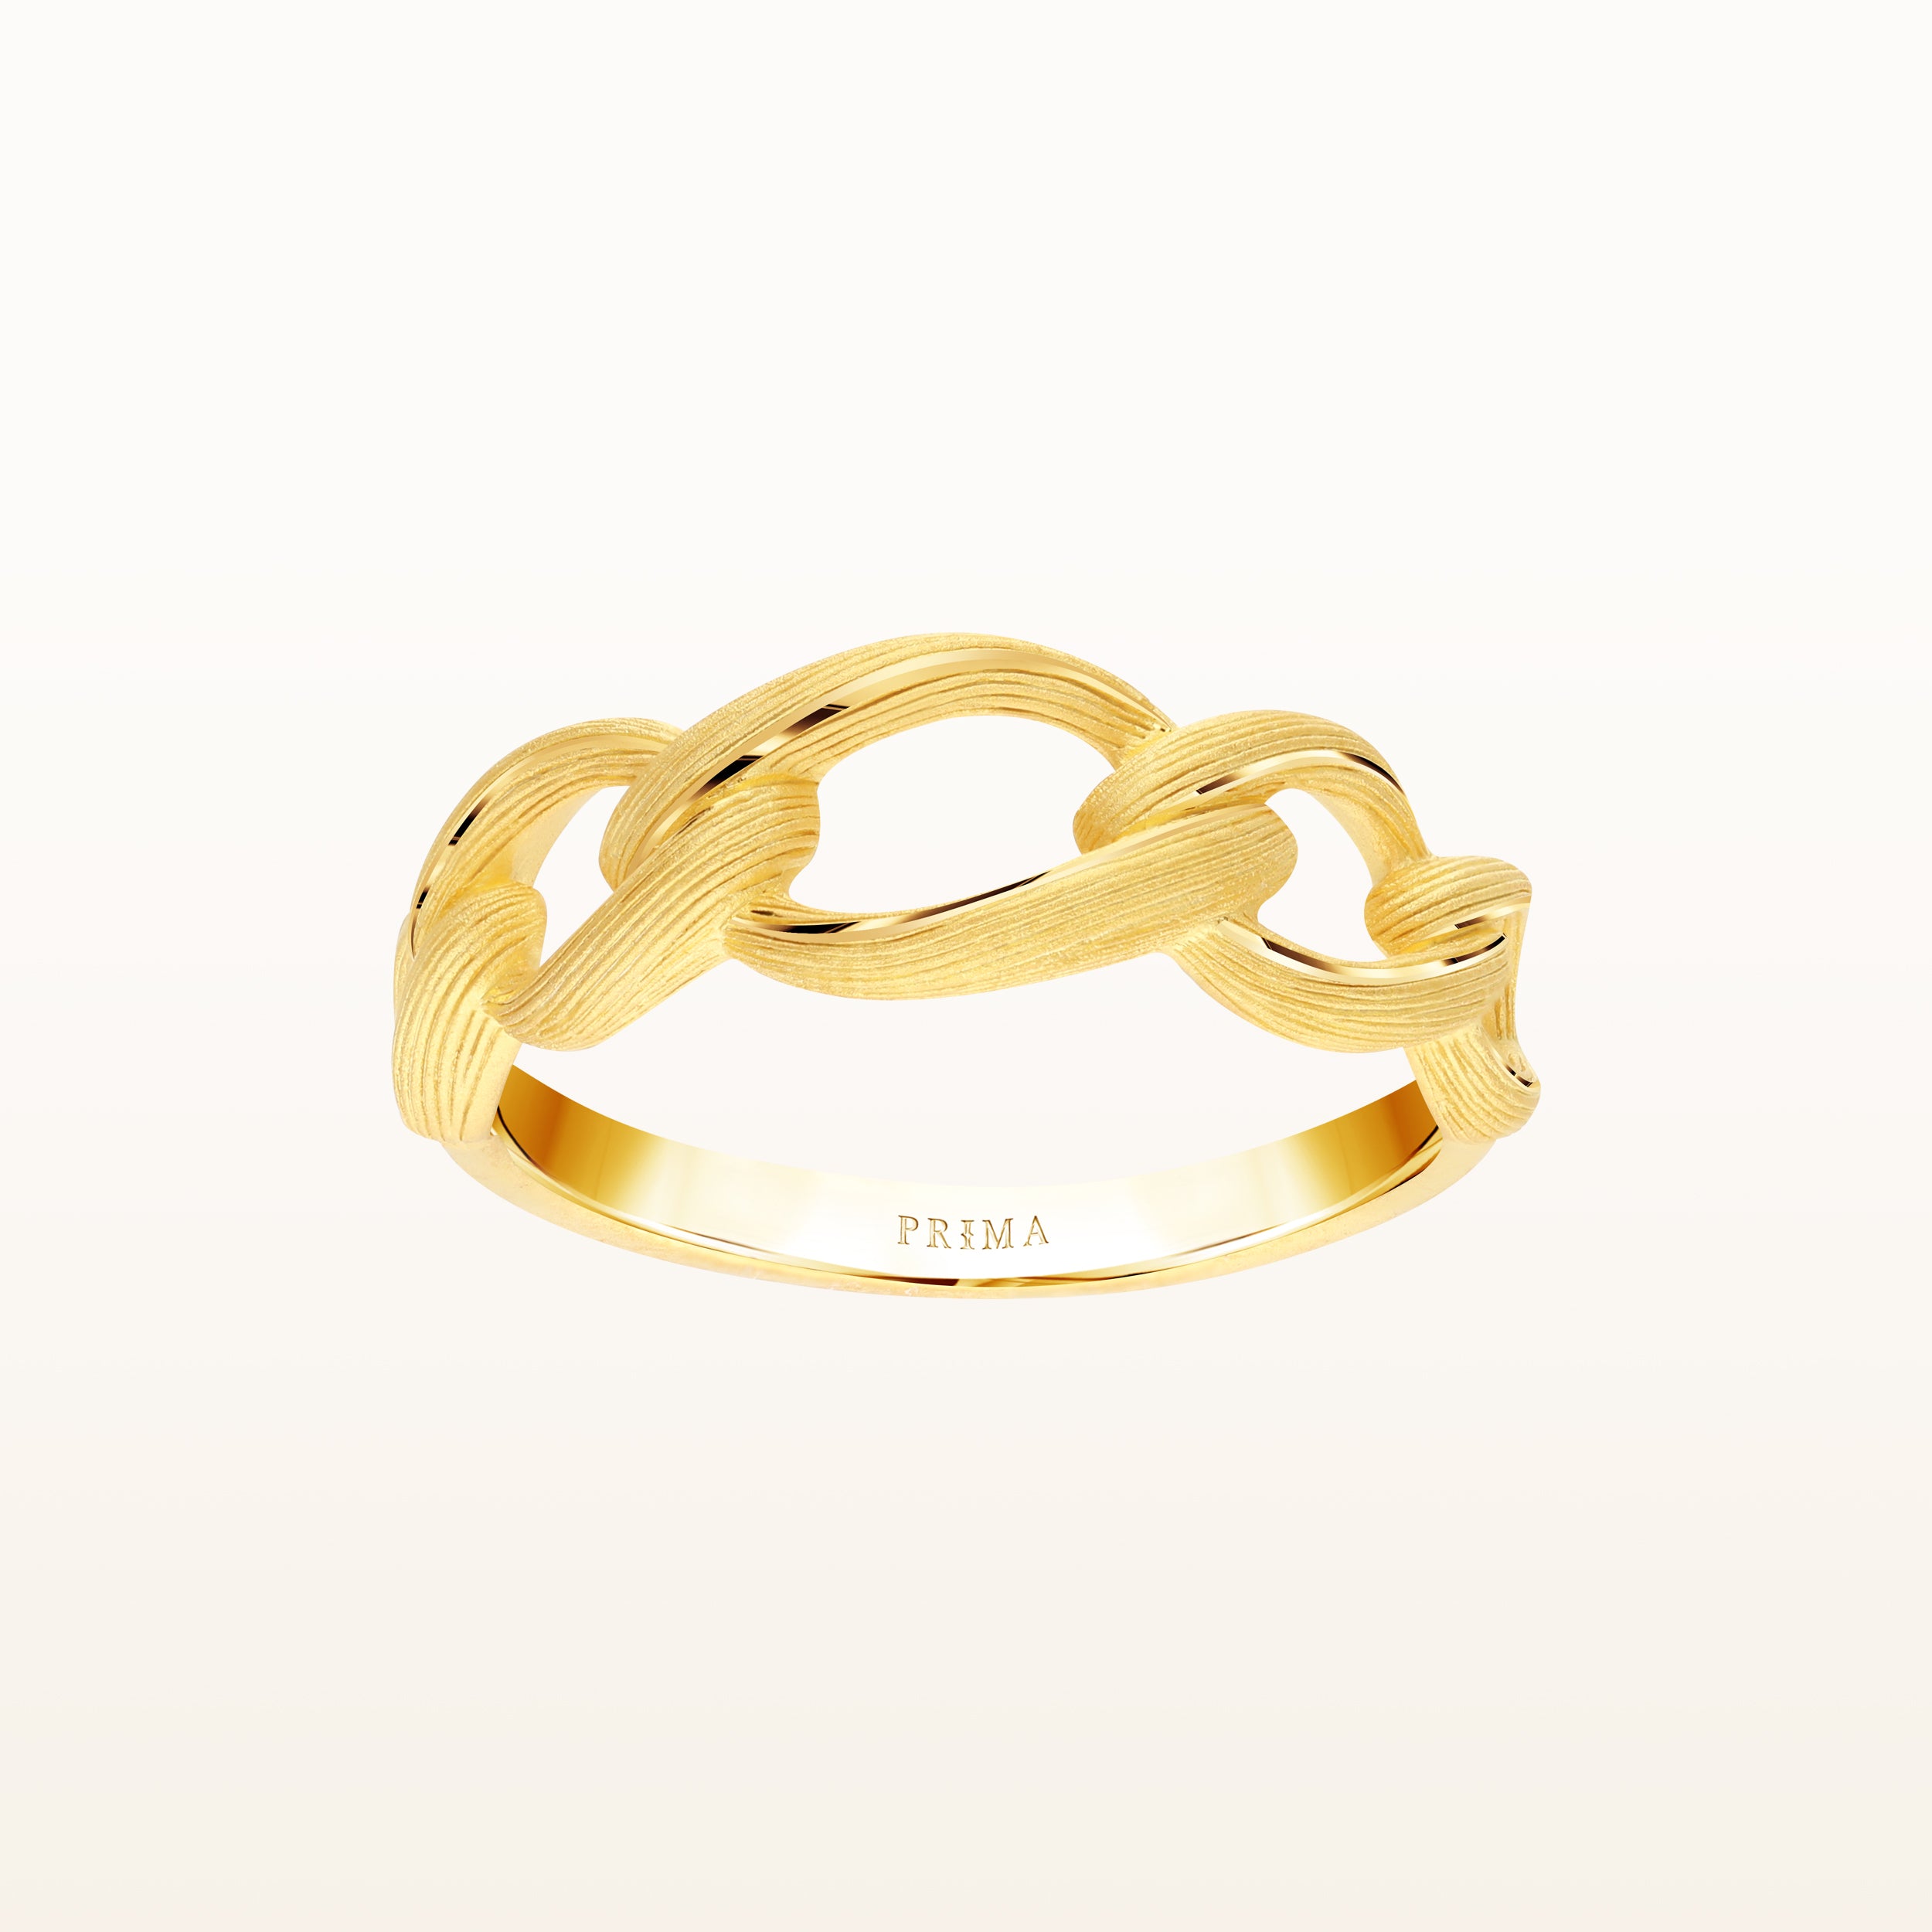 Exquisite 22k Gold Ring for Women